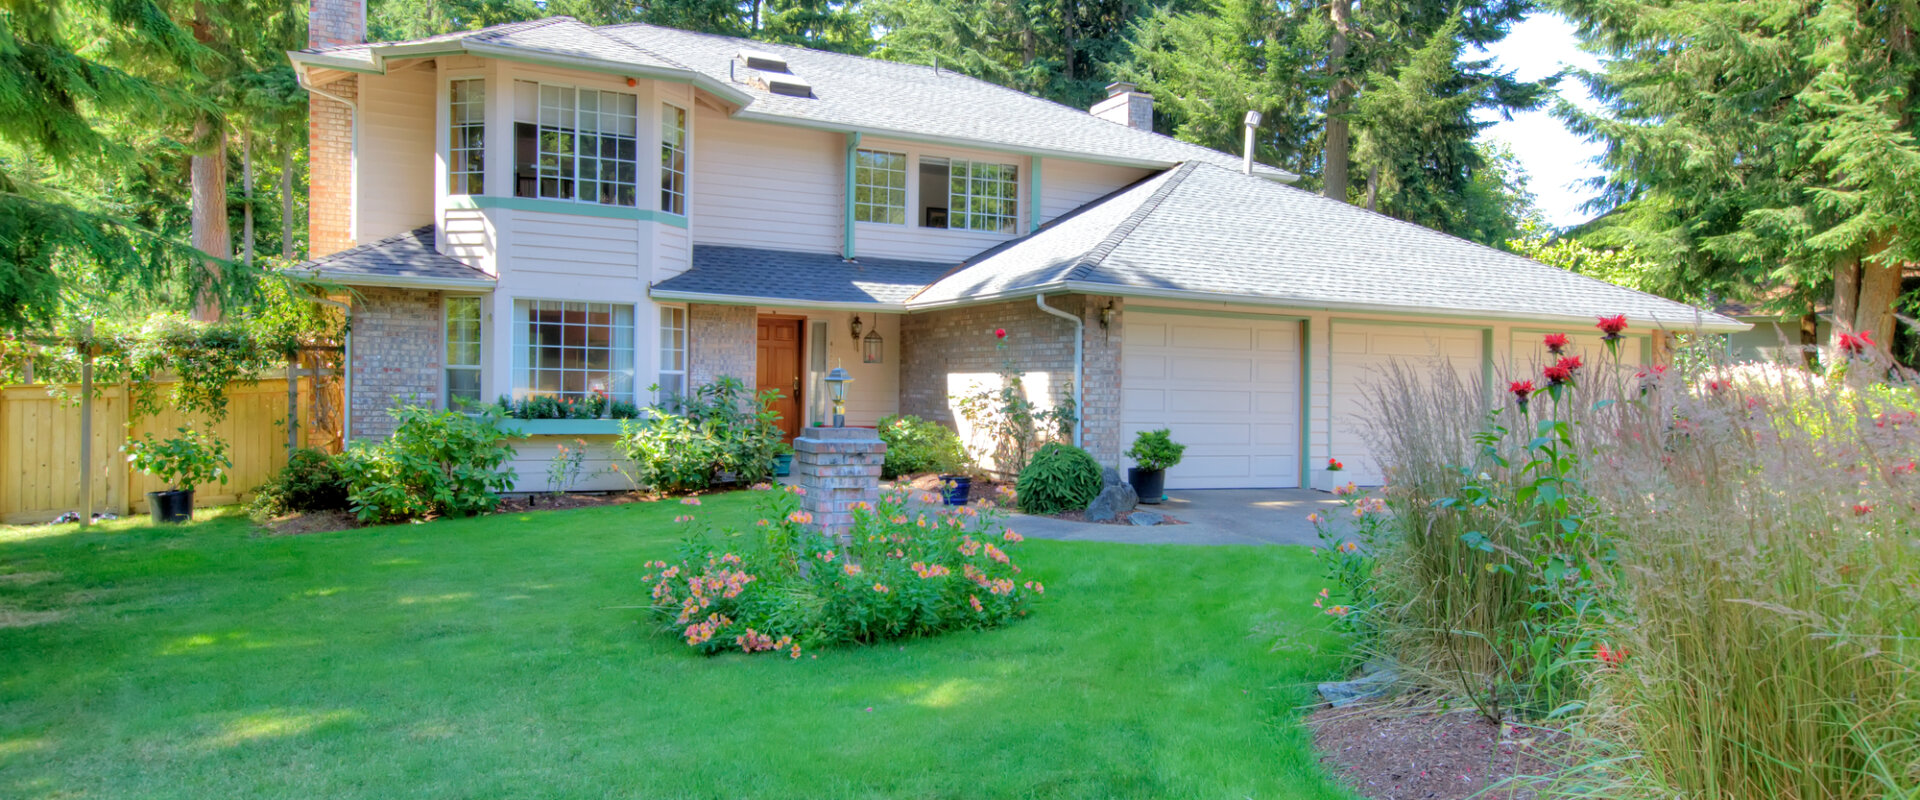 Sell Your House Fast in Tukwila